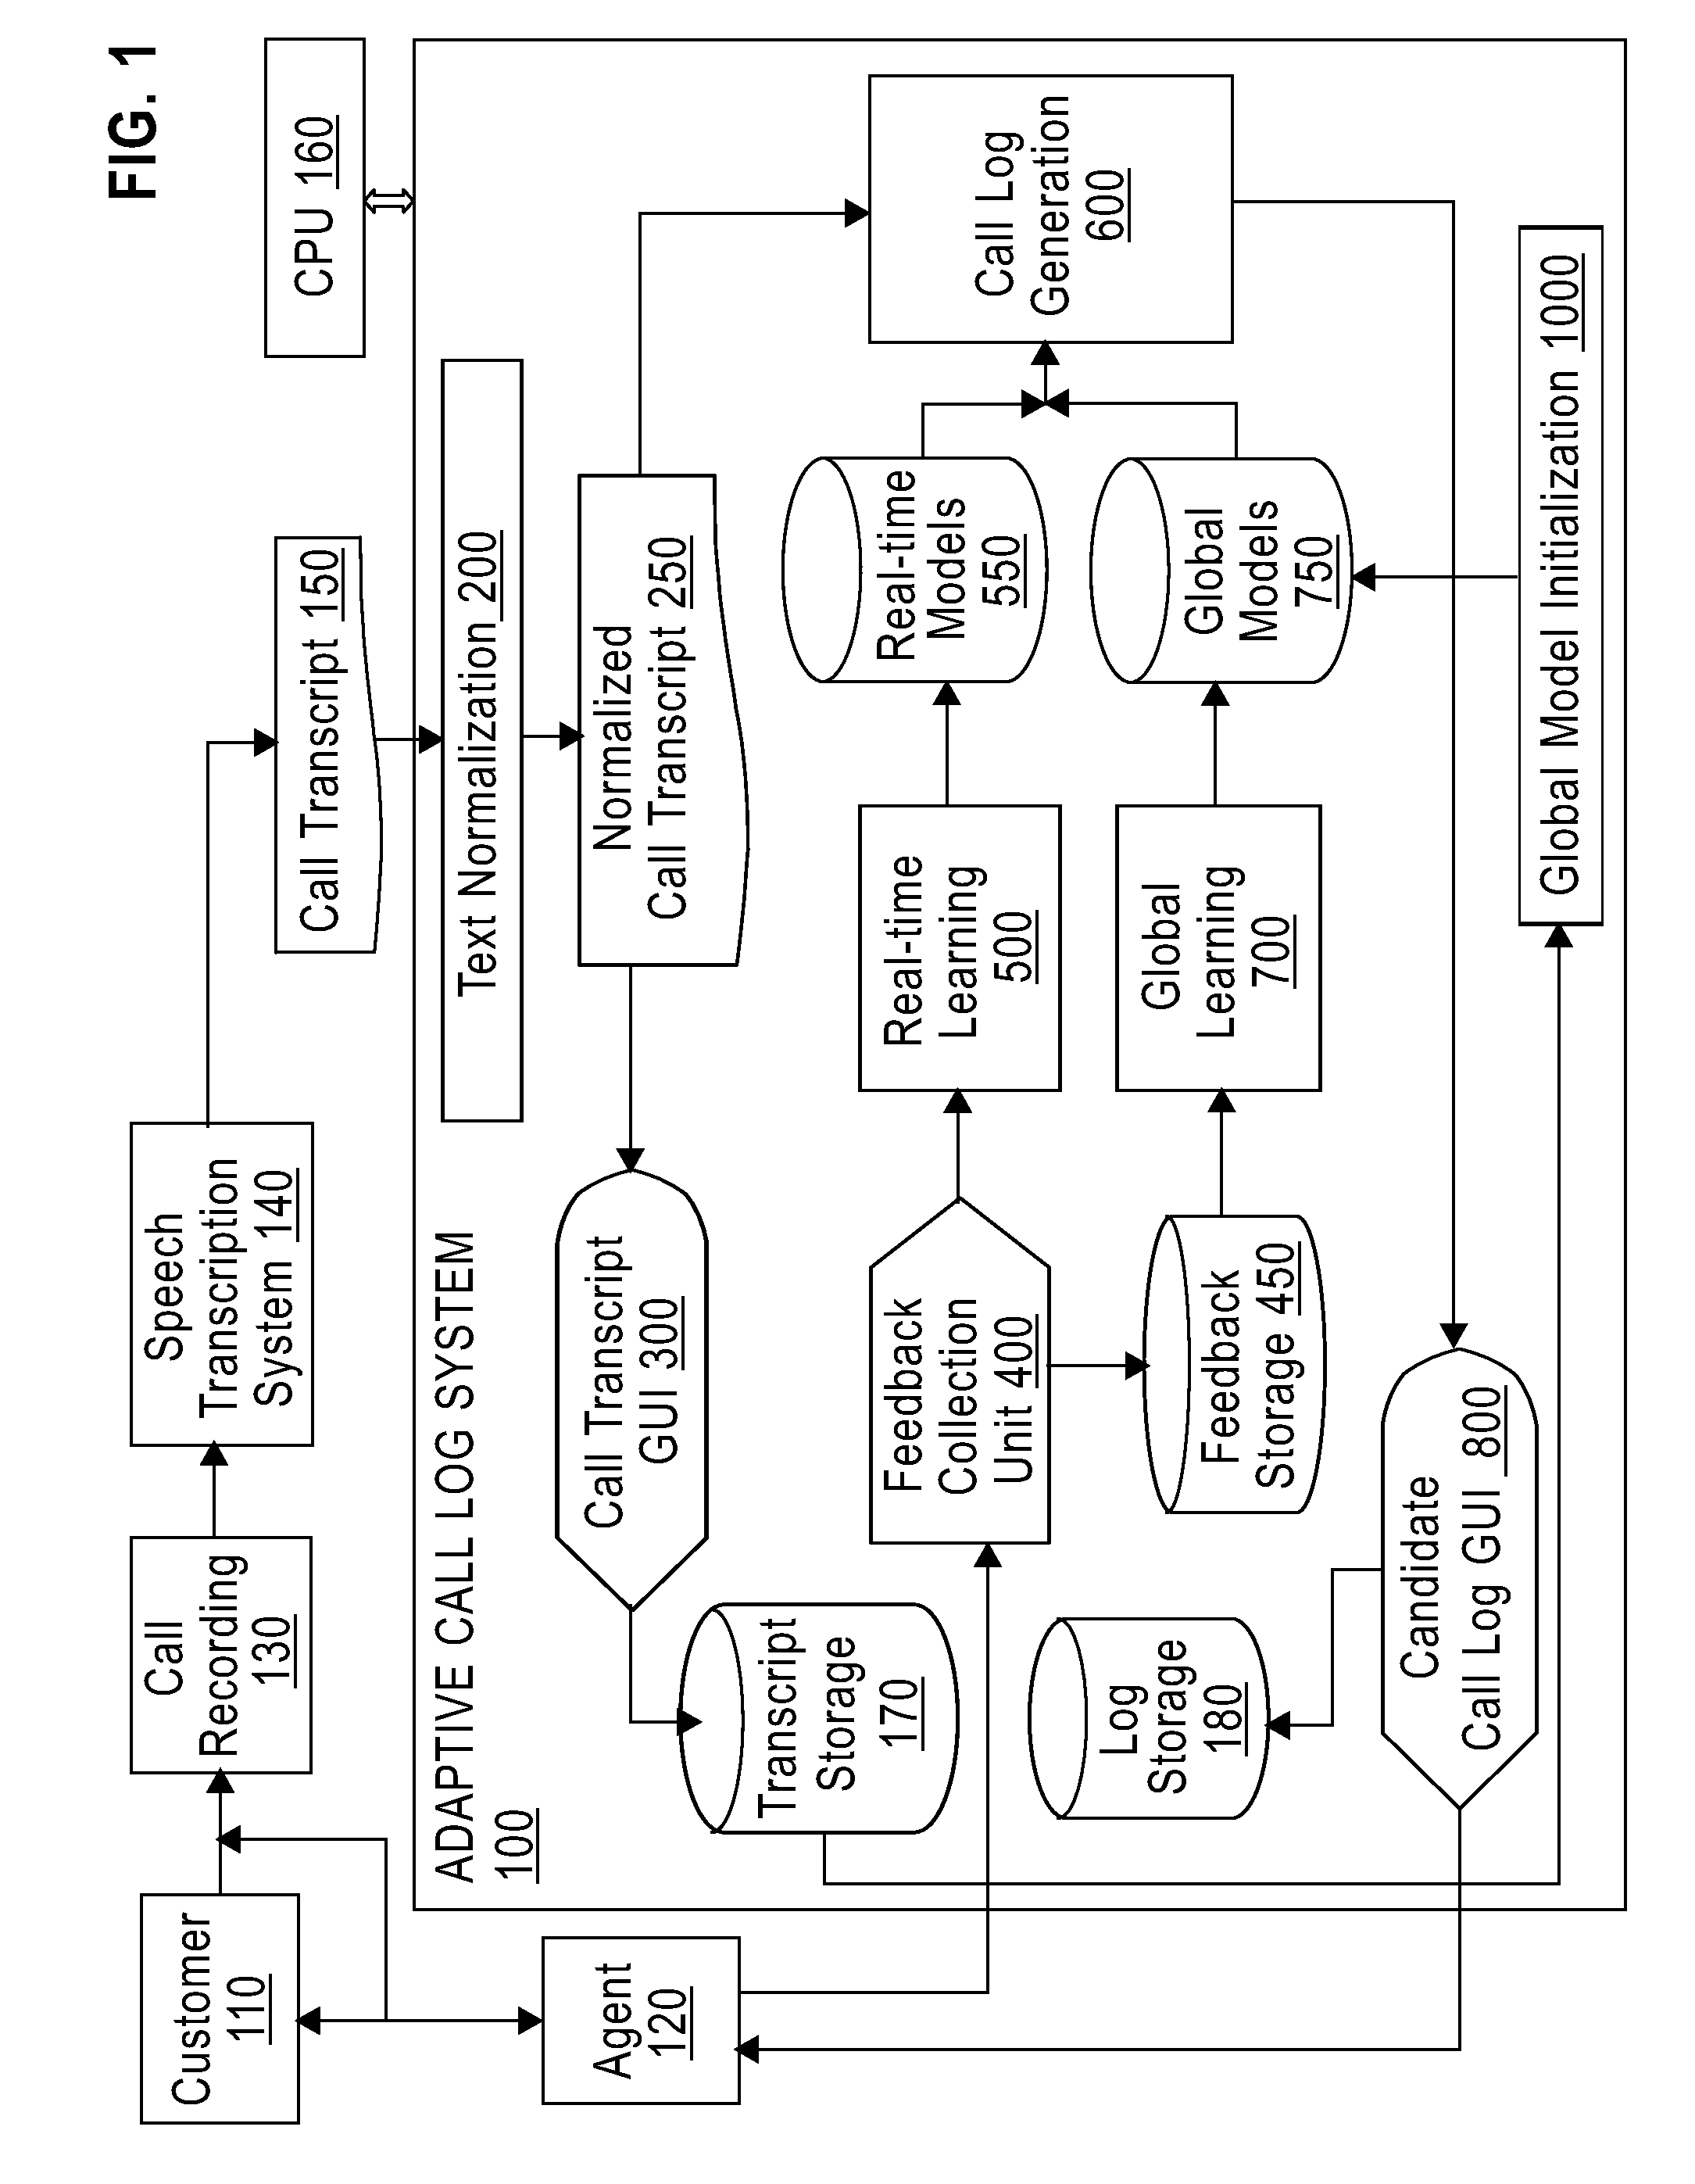 System and Method for Automatically Generating Adaptive Interaction Logs from Customer Interaction Text